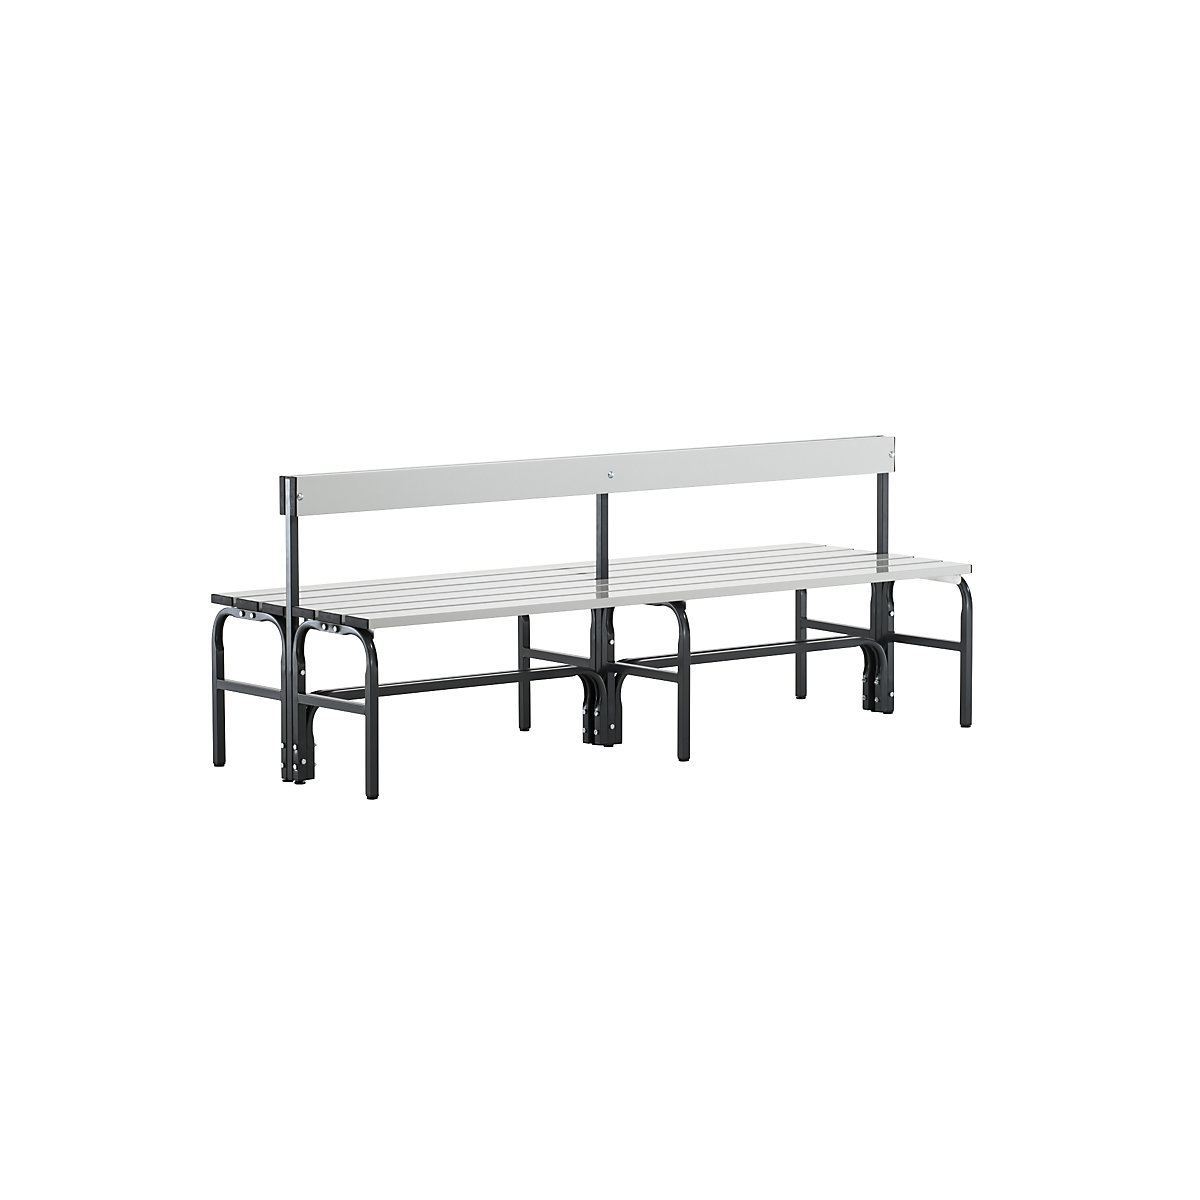 Sypro – Half height cloakroom bench with back rest, double sided, aluminium, length 2000 mm, charcoal